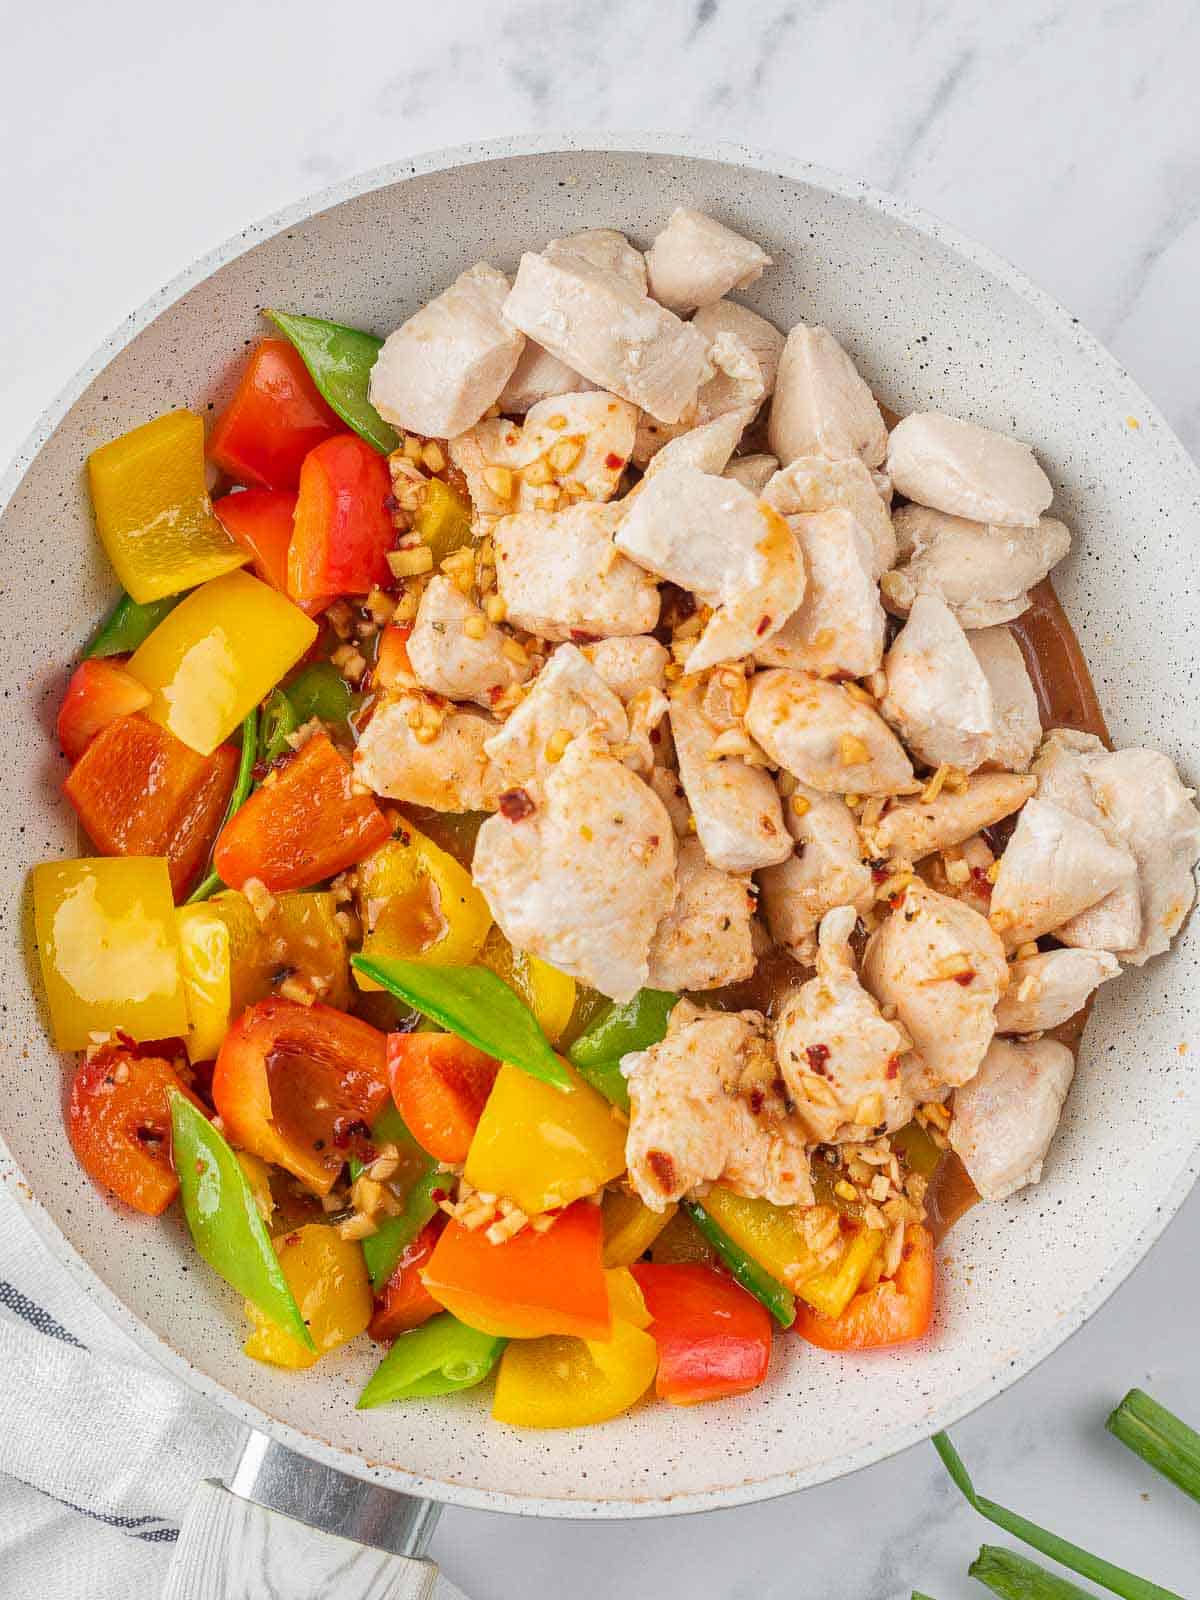 Chicken added to the pan of vegetables.